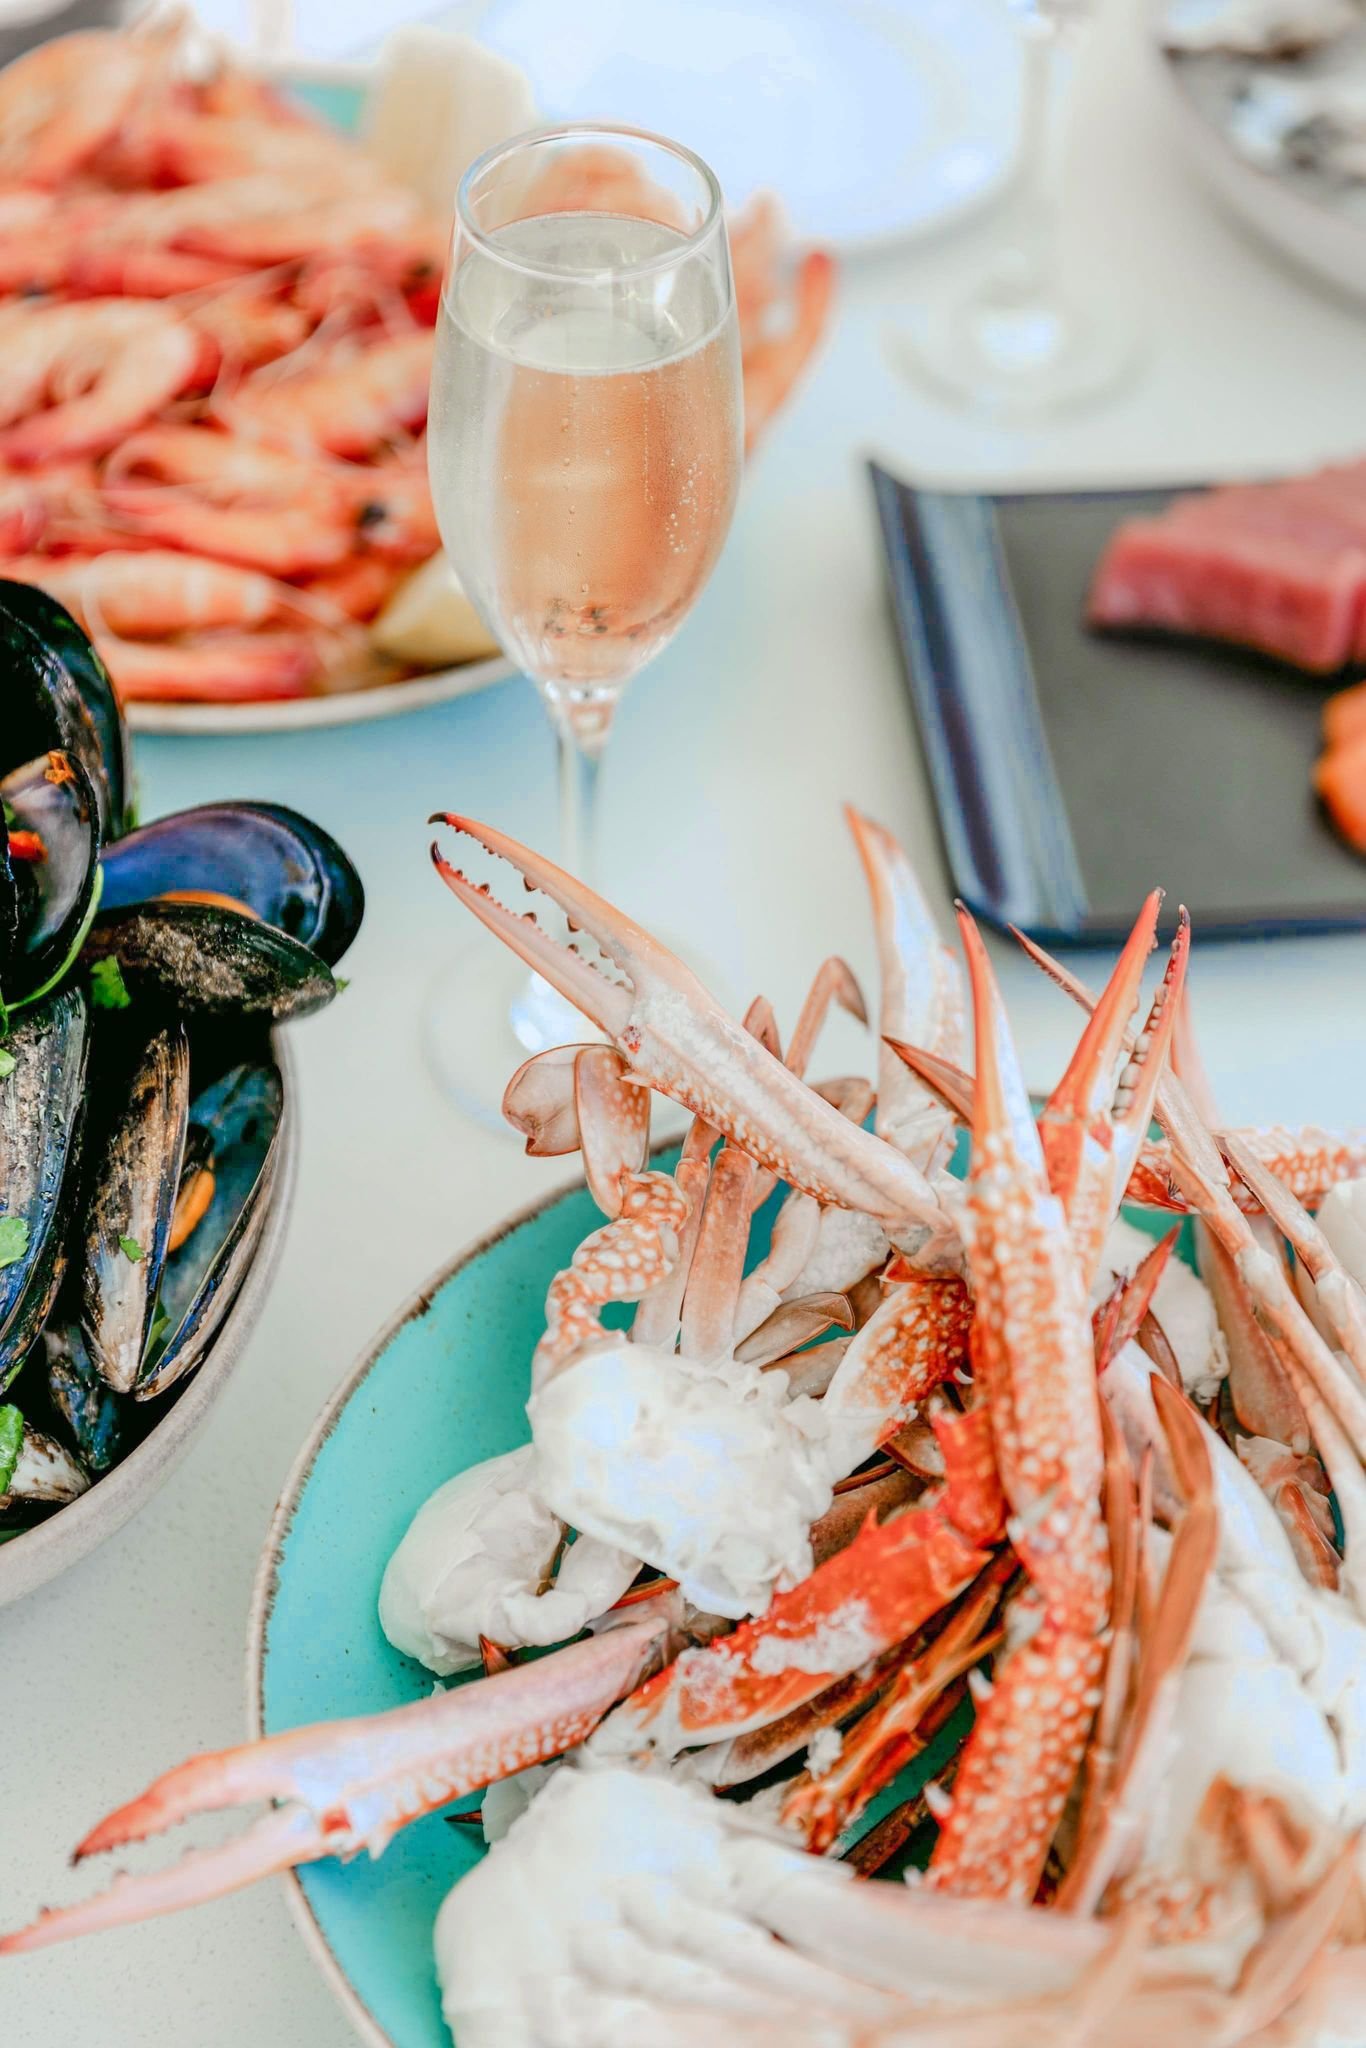 Five of the best all you can eat buffets on the Gold Coast | Dish Cult